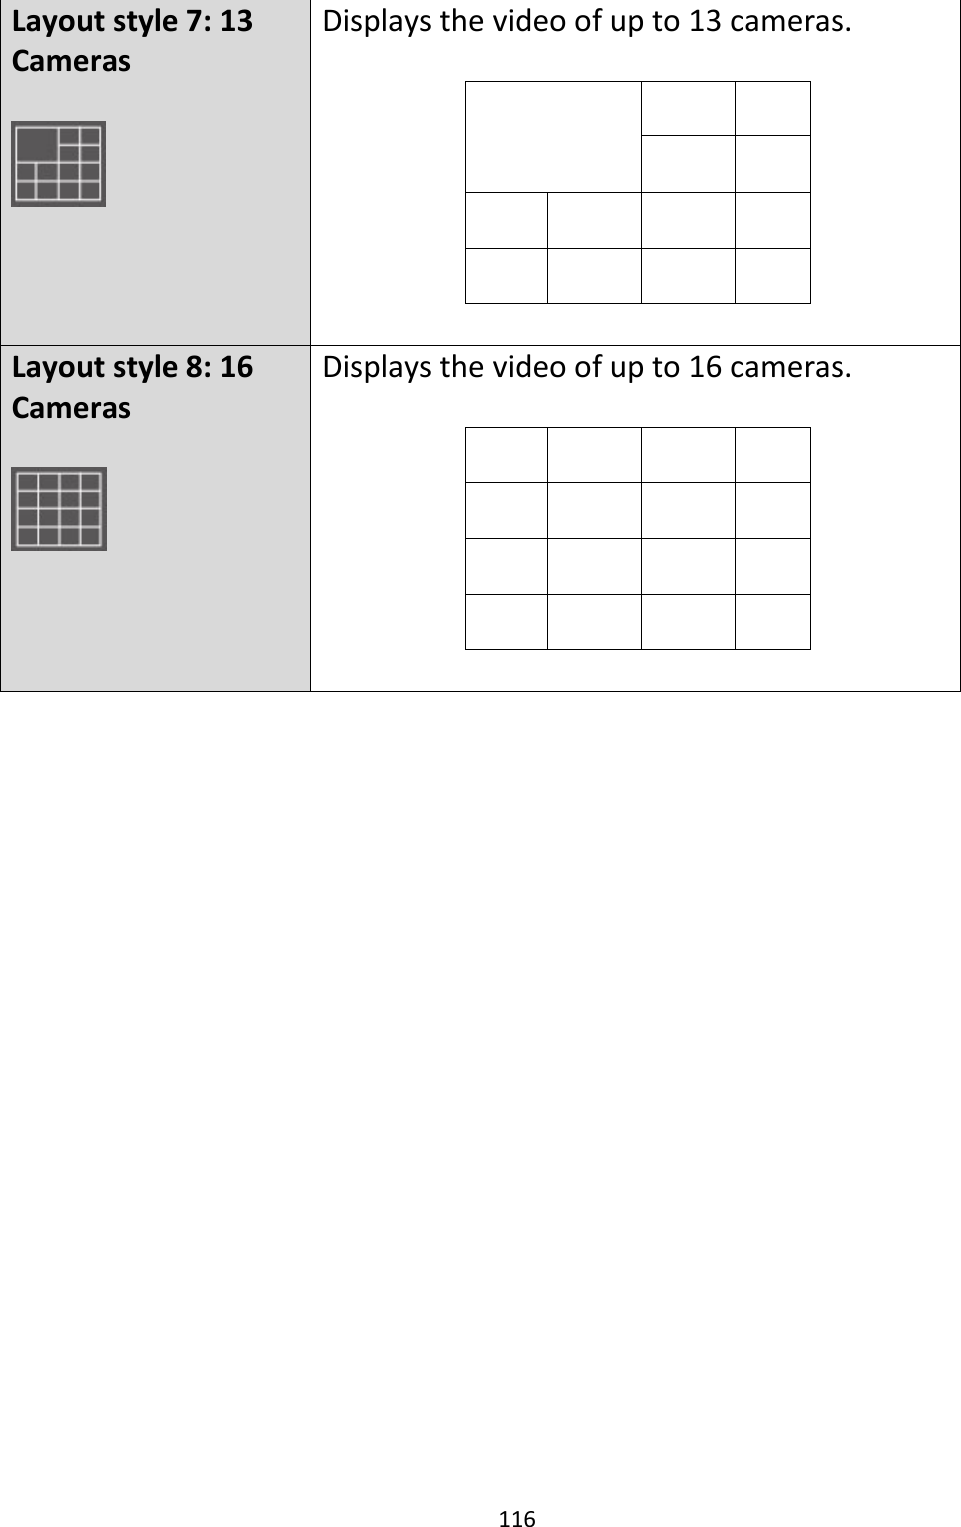 116   Layout style 7: 13 Cameras   Displays the video of up to 13 cameras.                  Layout style 8: 16 Cameras   Displays the video of up to 16 cameras.                      